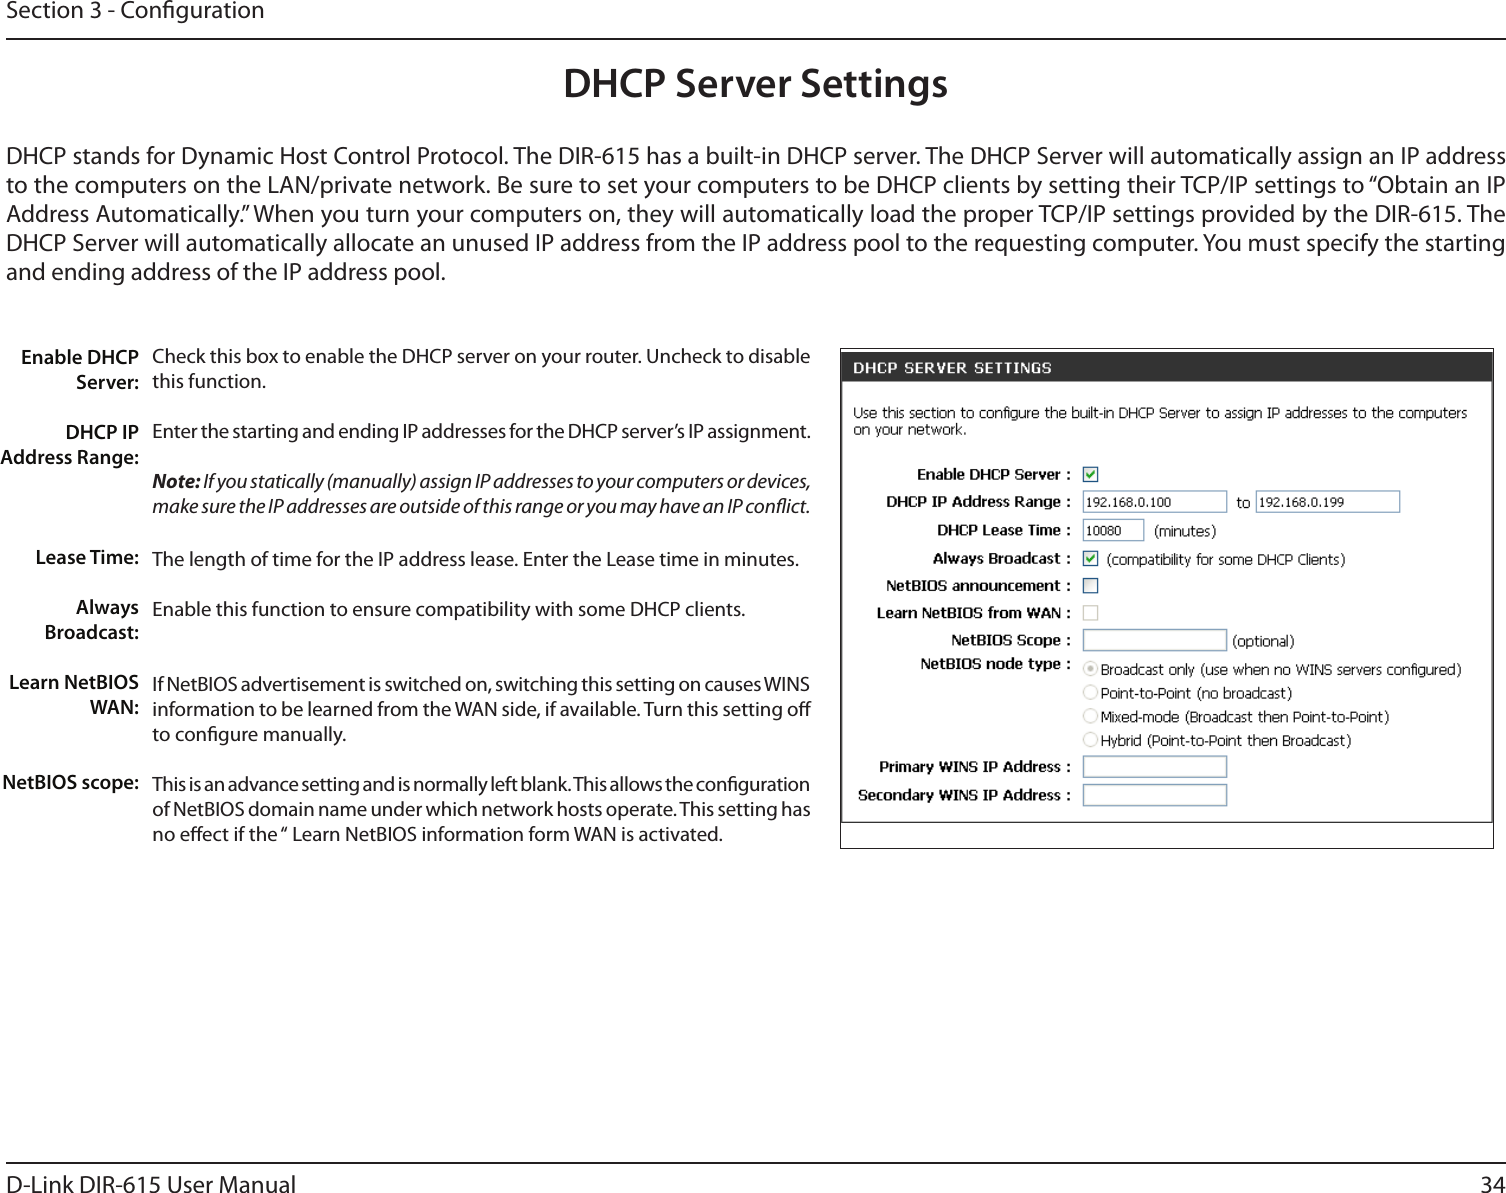 34D-Link DIR-615 User ManualSection 3 - CongurationCheck this box to enable the DHCP server on your router. Uncheck to disable this function.Enter the starting and ending IP addresses for the DHCP server’s IP assignment.Note: If you statically (manually) assign IP addresses to your computers or devices, make sure the IP addresses are outside of this range or you may have an IP conict. The length of time for the IP address lease. Enter the Lease time in minutes.Enable this function to ensure compatibility with some DHCP clients.If NetBIOS advertisement is switched on, switching this setting on causes WINS information to be learned from the WAN side, if available. Turn this setting o to congure manually. This is an advance setting and is normally left blank. This allows the conguration of NetBIOS domain name under which network hosts operate. This setting has no eect if the “ Learn NetBIOS information form WAN is activated.  Enable DHCP Server:DHCP IP Address Range:Lease Time:Always Broadcast:Learn NetBIOS WAN:NetBIOS scope: DHCP Server SettingsDHCP stands for Dynamic Host Control Protocol. The DIR-615 has a built-in DHCP server. The DHCP Server will automatically assign an IP address to the computers on the LAN/private network. Be sure to set your computers to be DHCP clients by setting their TCP/IP settings to “Obtain an IP Address Automatically.” When you turn your computers on, they will automatically load the proper TCP/IP settings provided by the DIR-615. The DHCP Server will automatically allocate an unused IP address from the IP address pool to the requesting computer. You must specify the starting and ending address of the IP address pool.